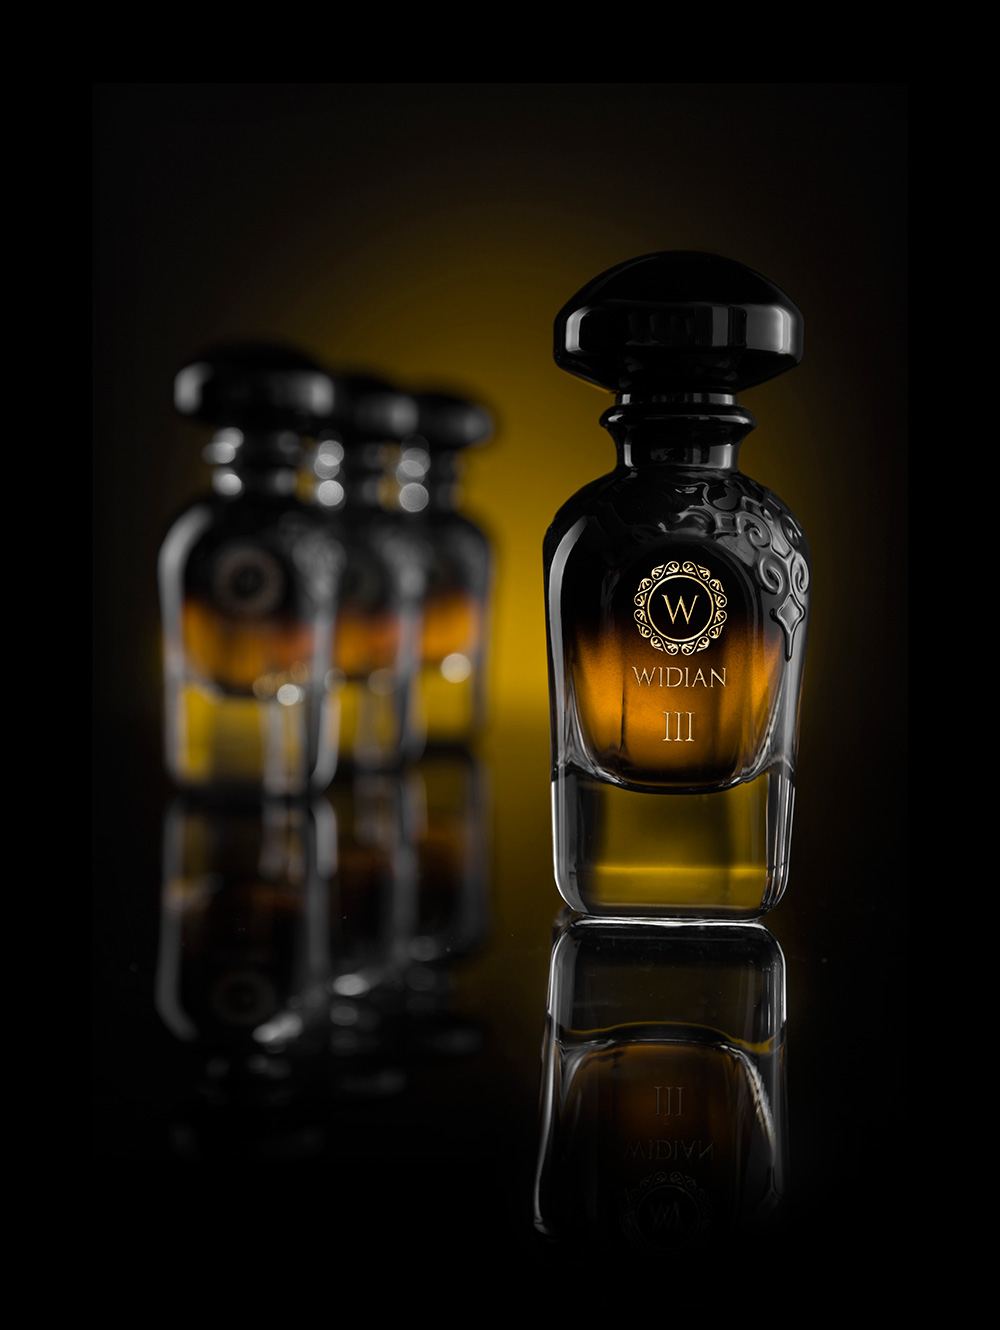 III WIDIAN perfume - a new fragrance for women and men 2015